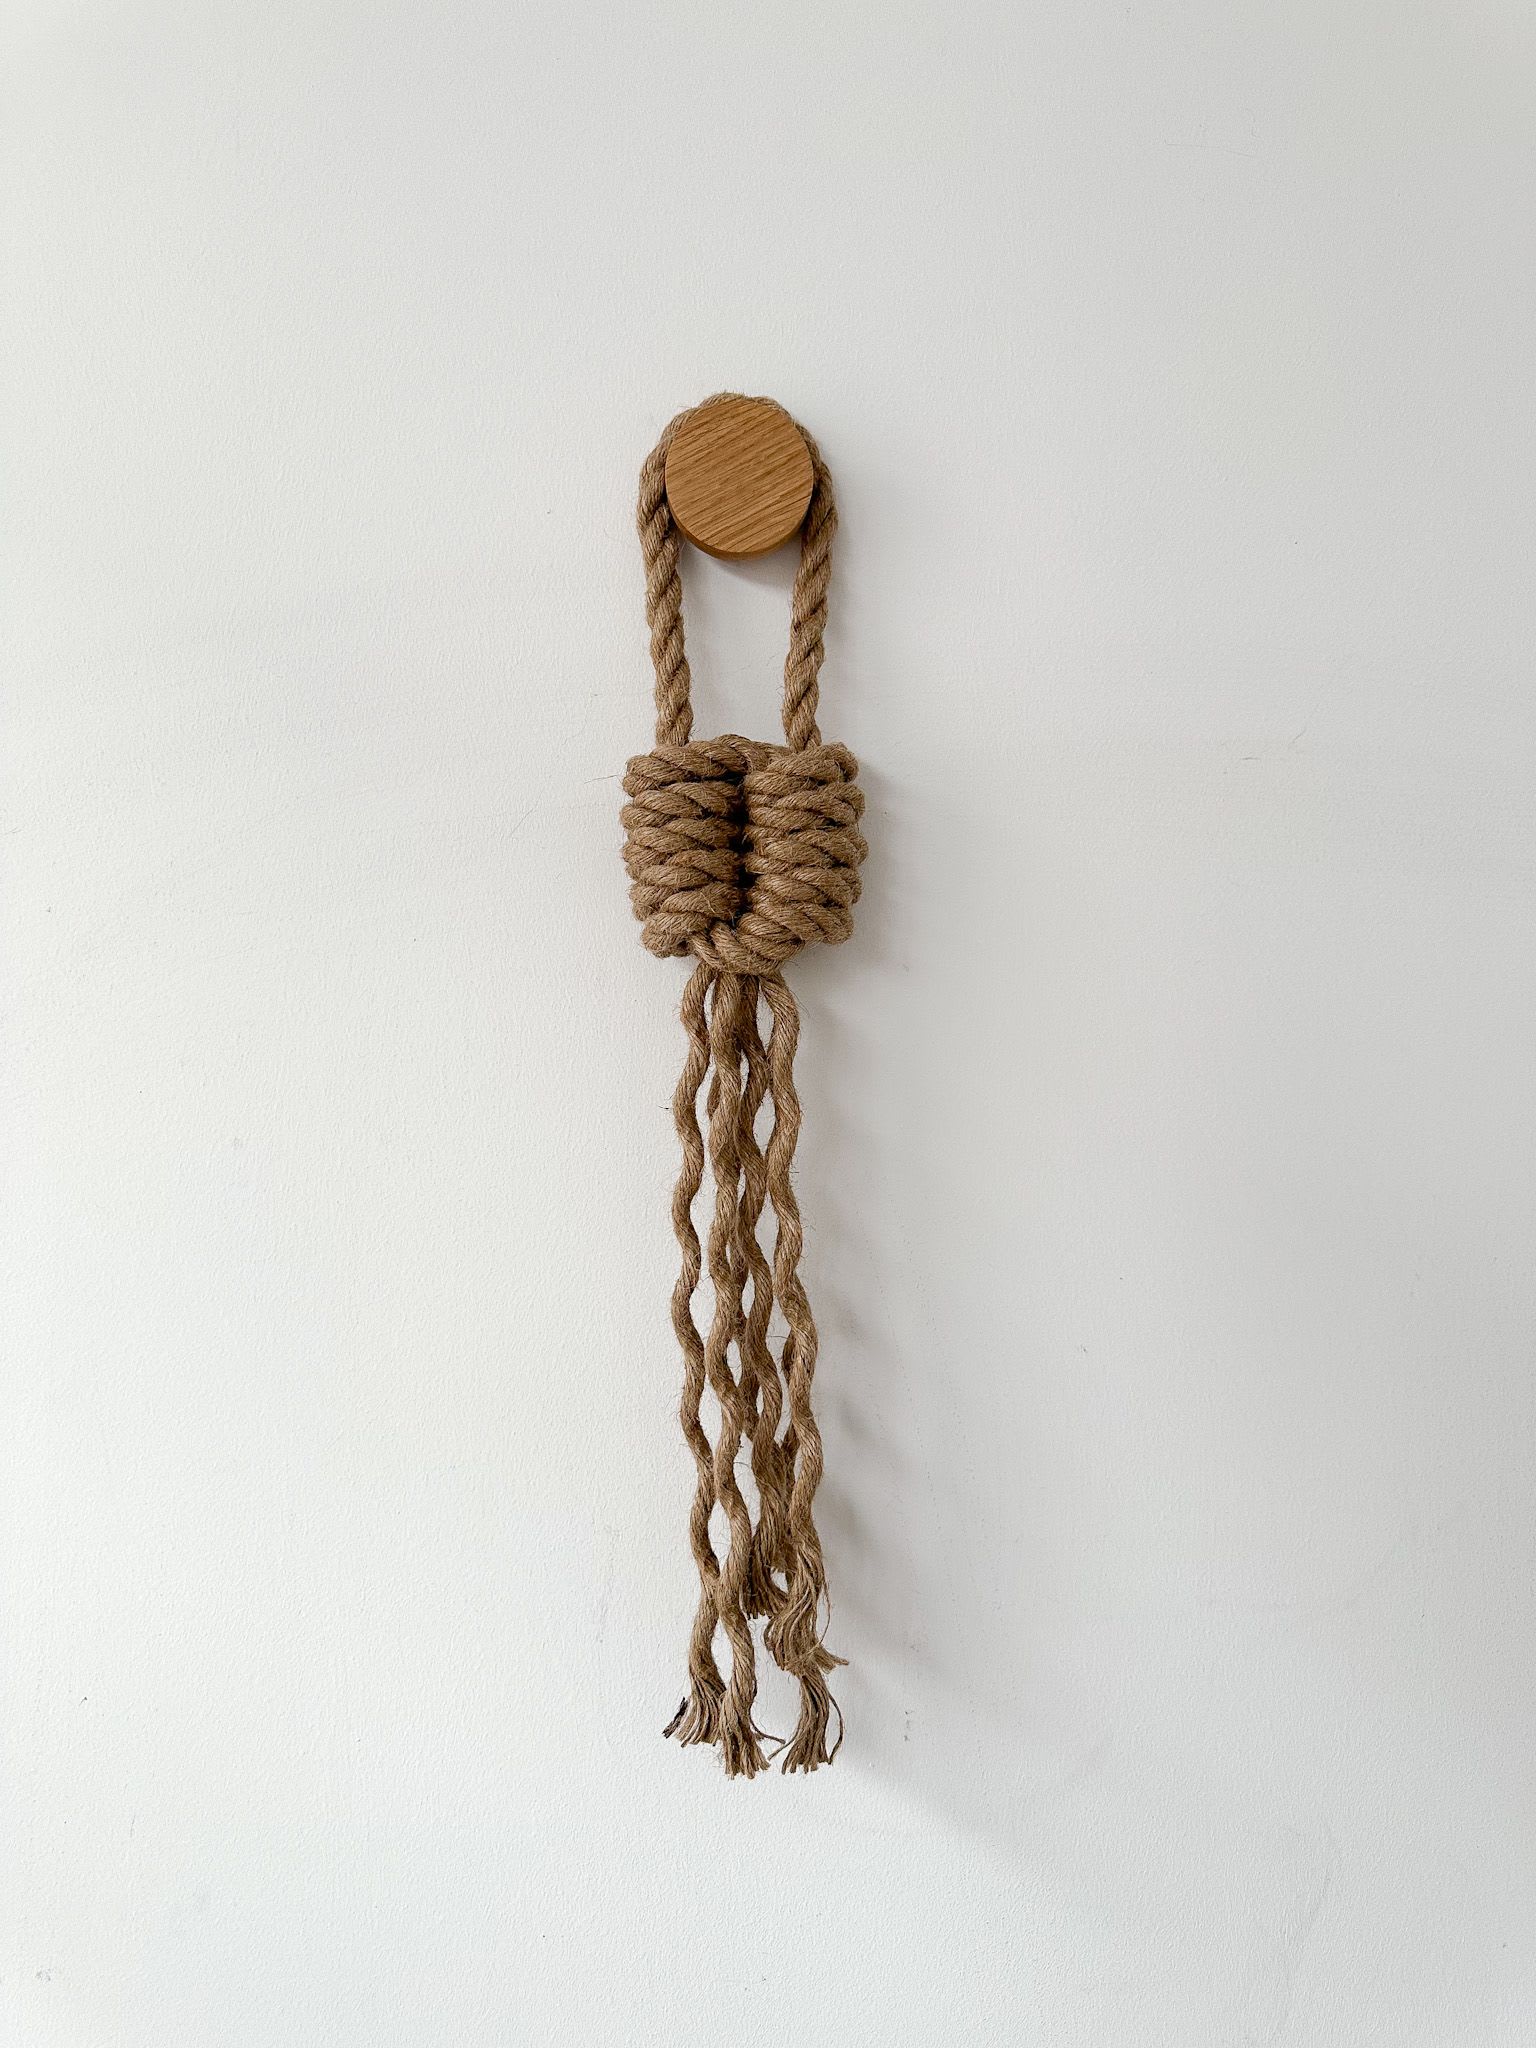 KNOT 002, Rope Sculpture Wall Hanging by Ana Salazar Atelier